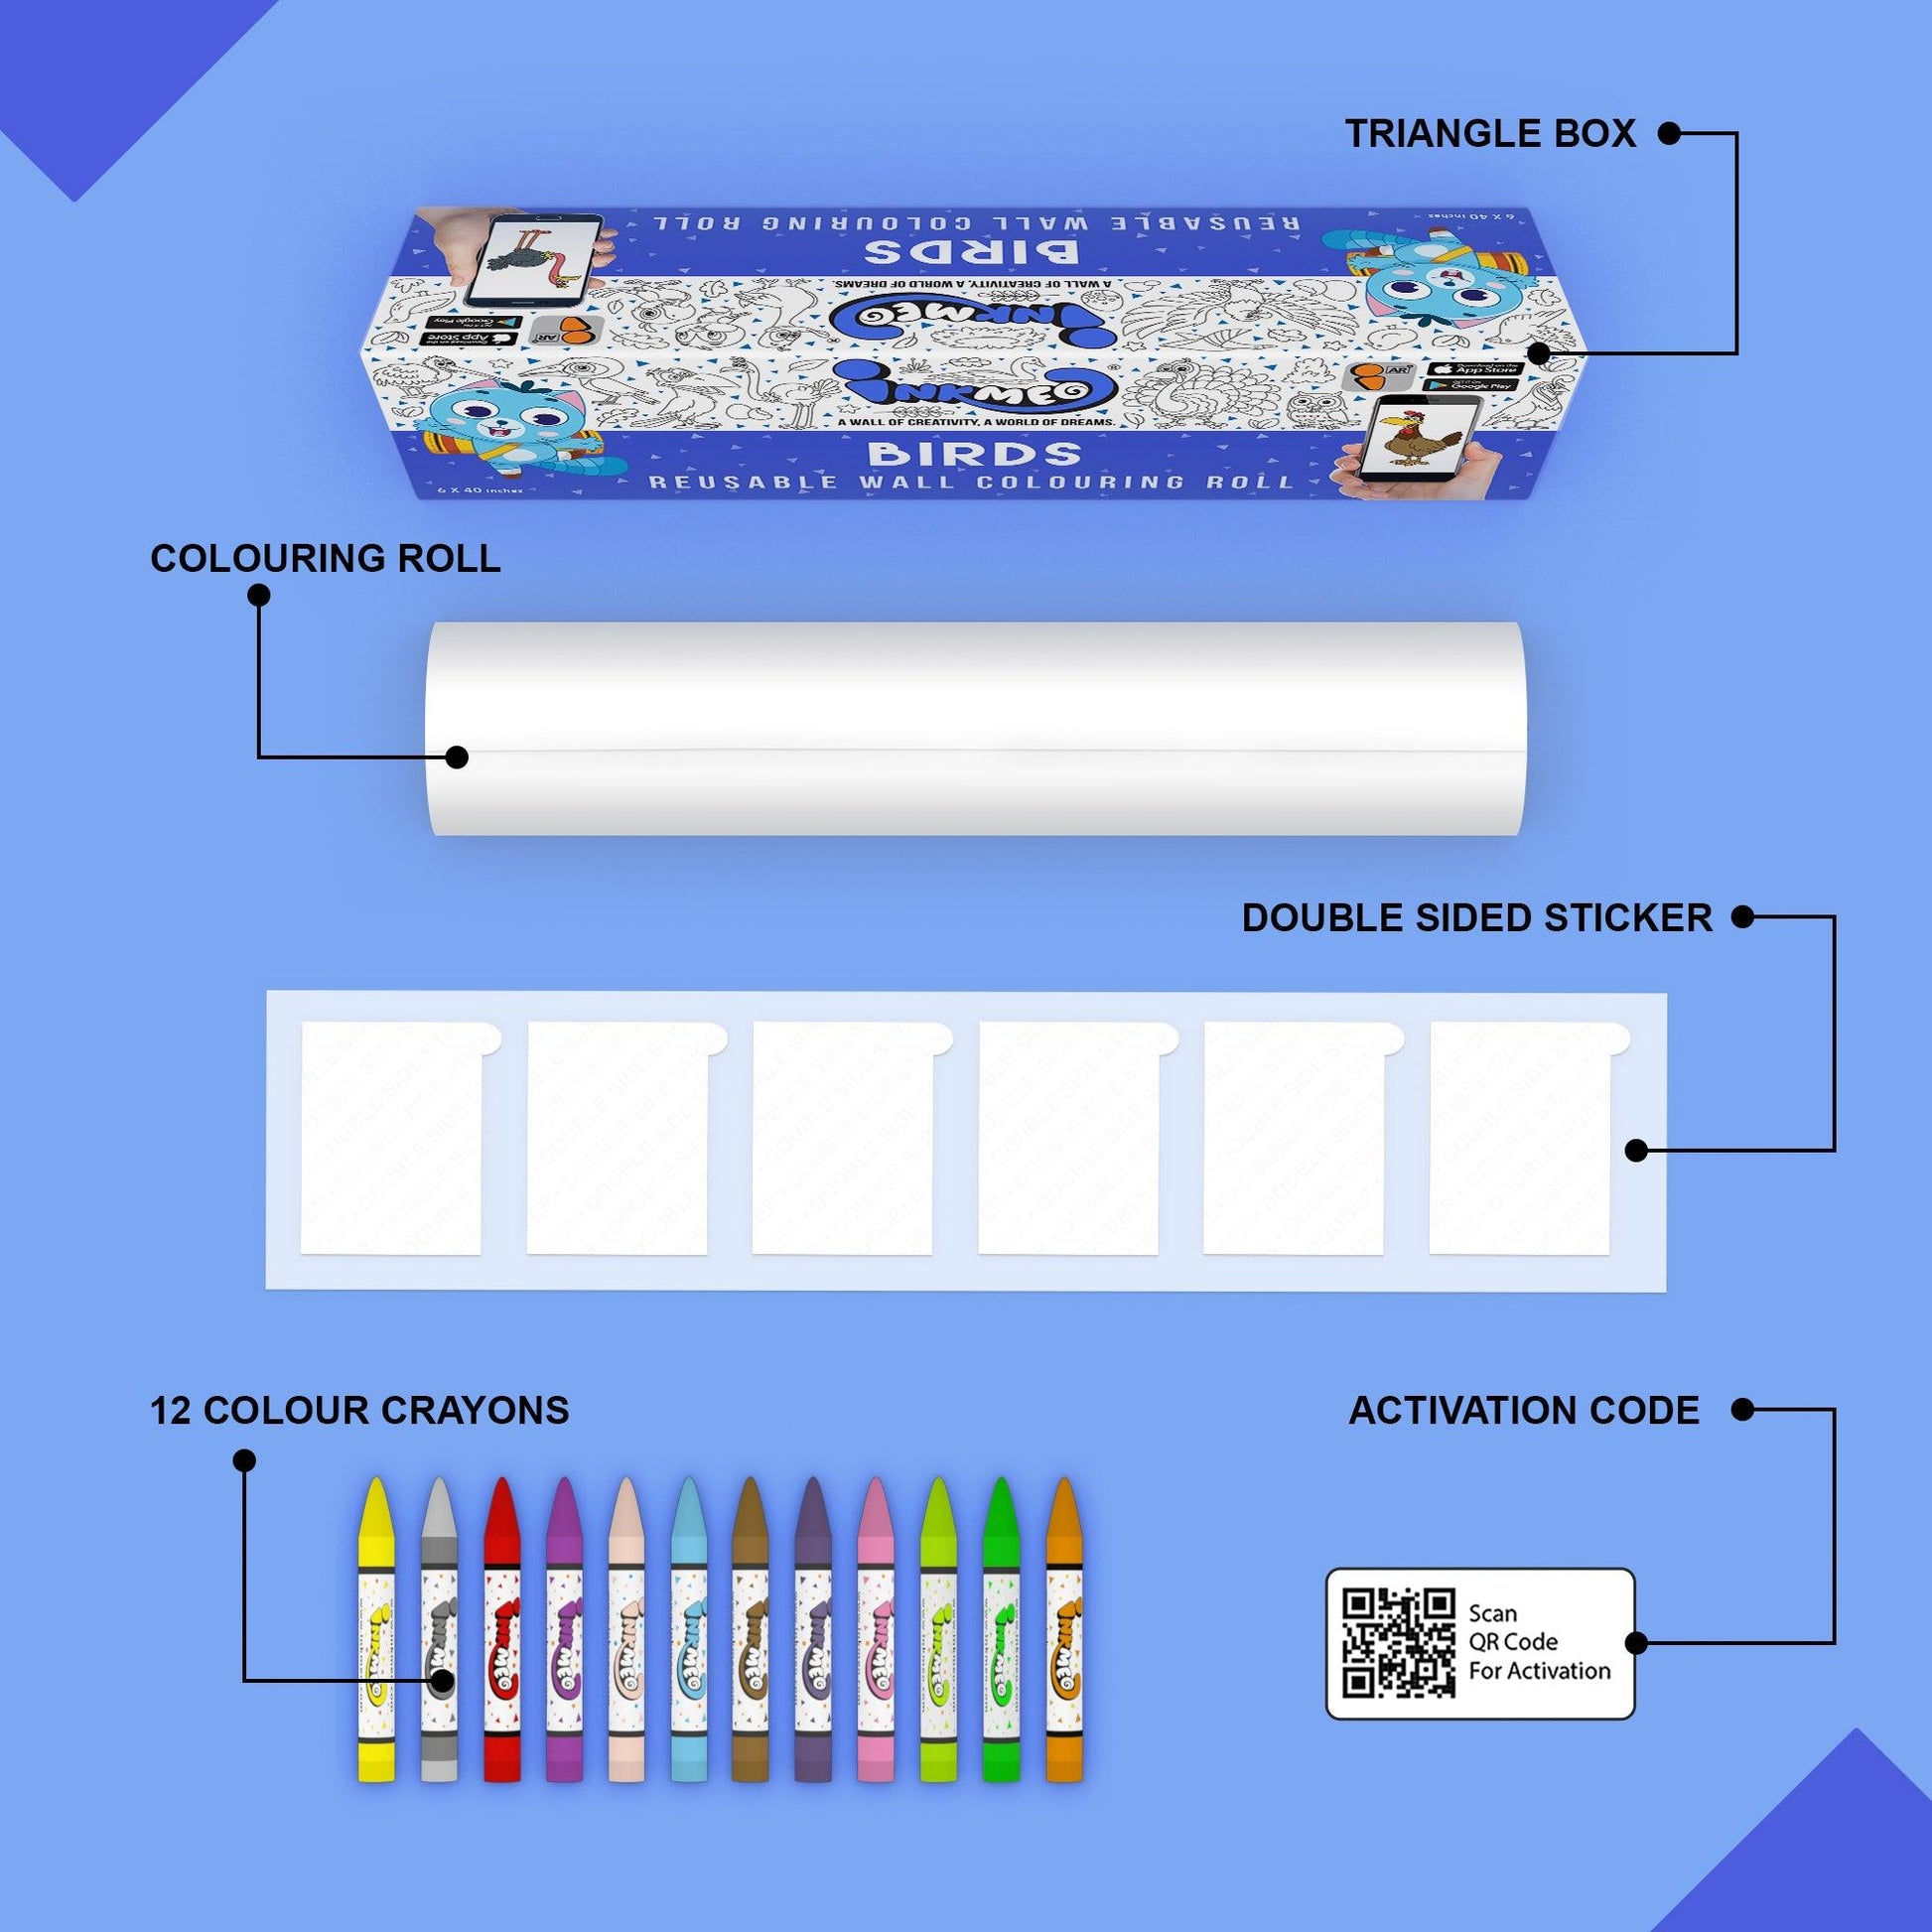 The image depicts a blue background with a single triangular box, a coloring roll, 6 double-sided stickers, 12 colored crayons, and an activation code.